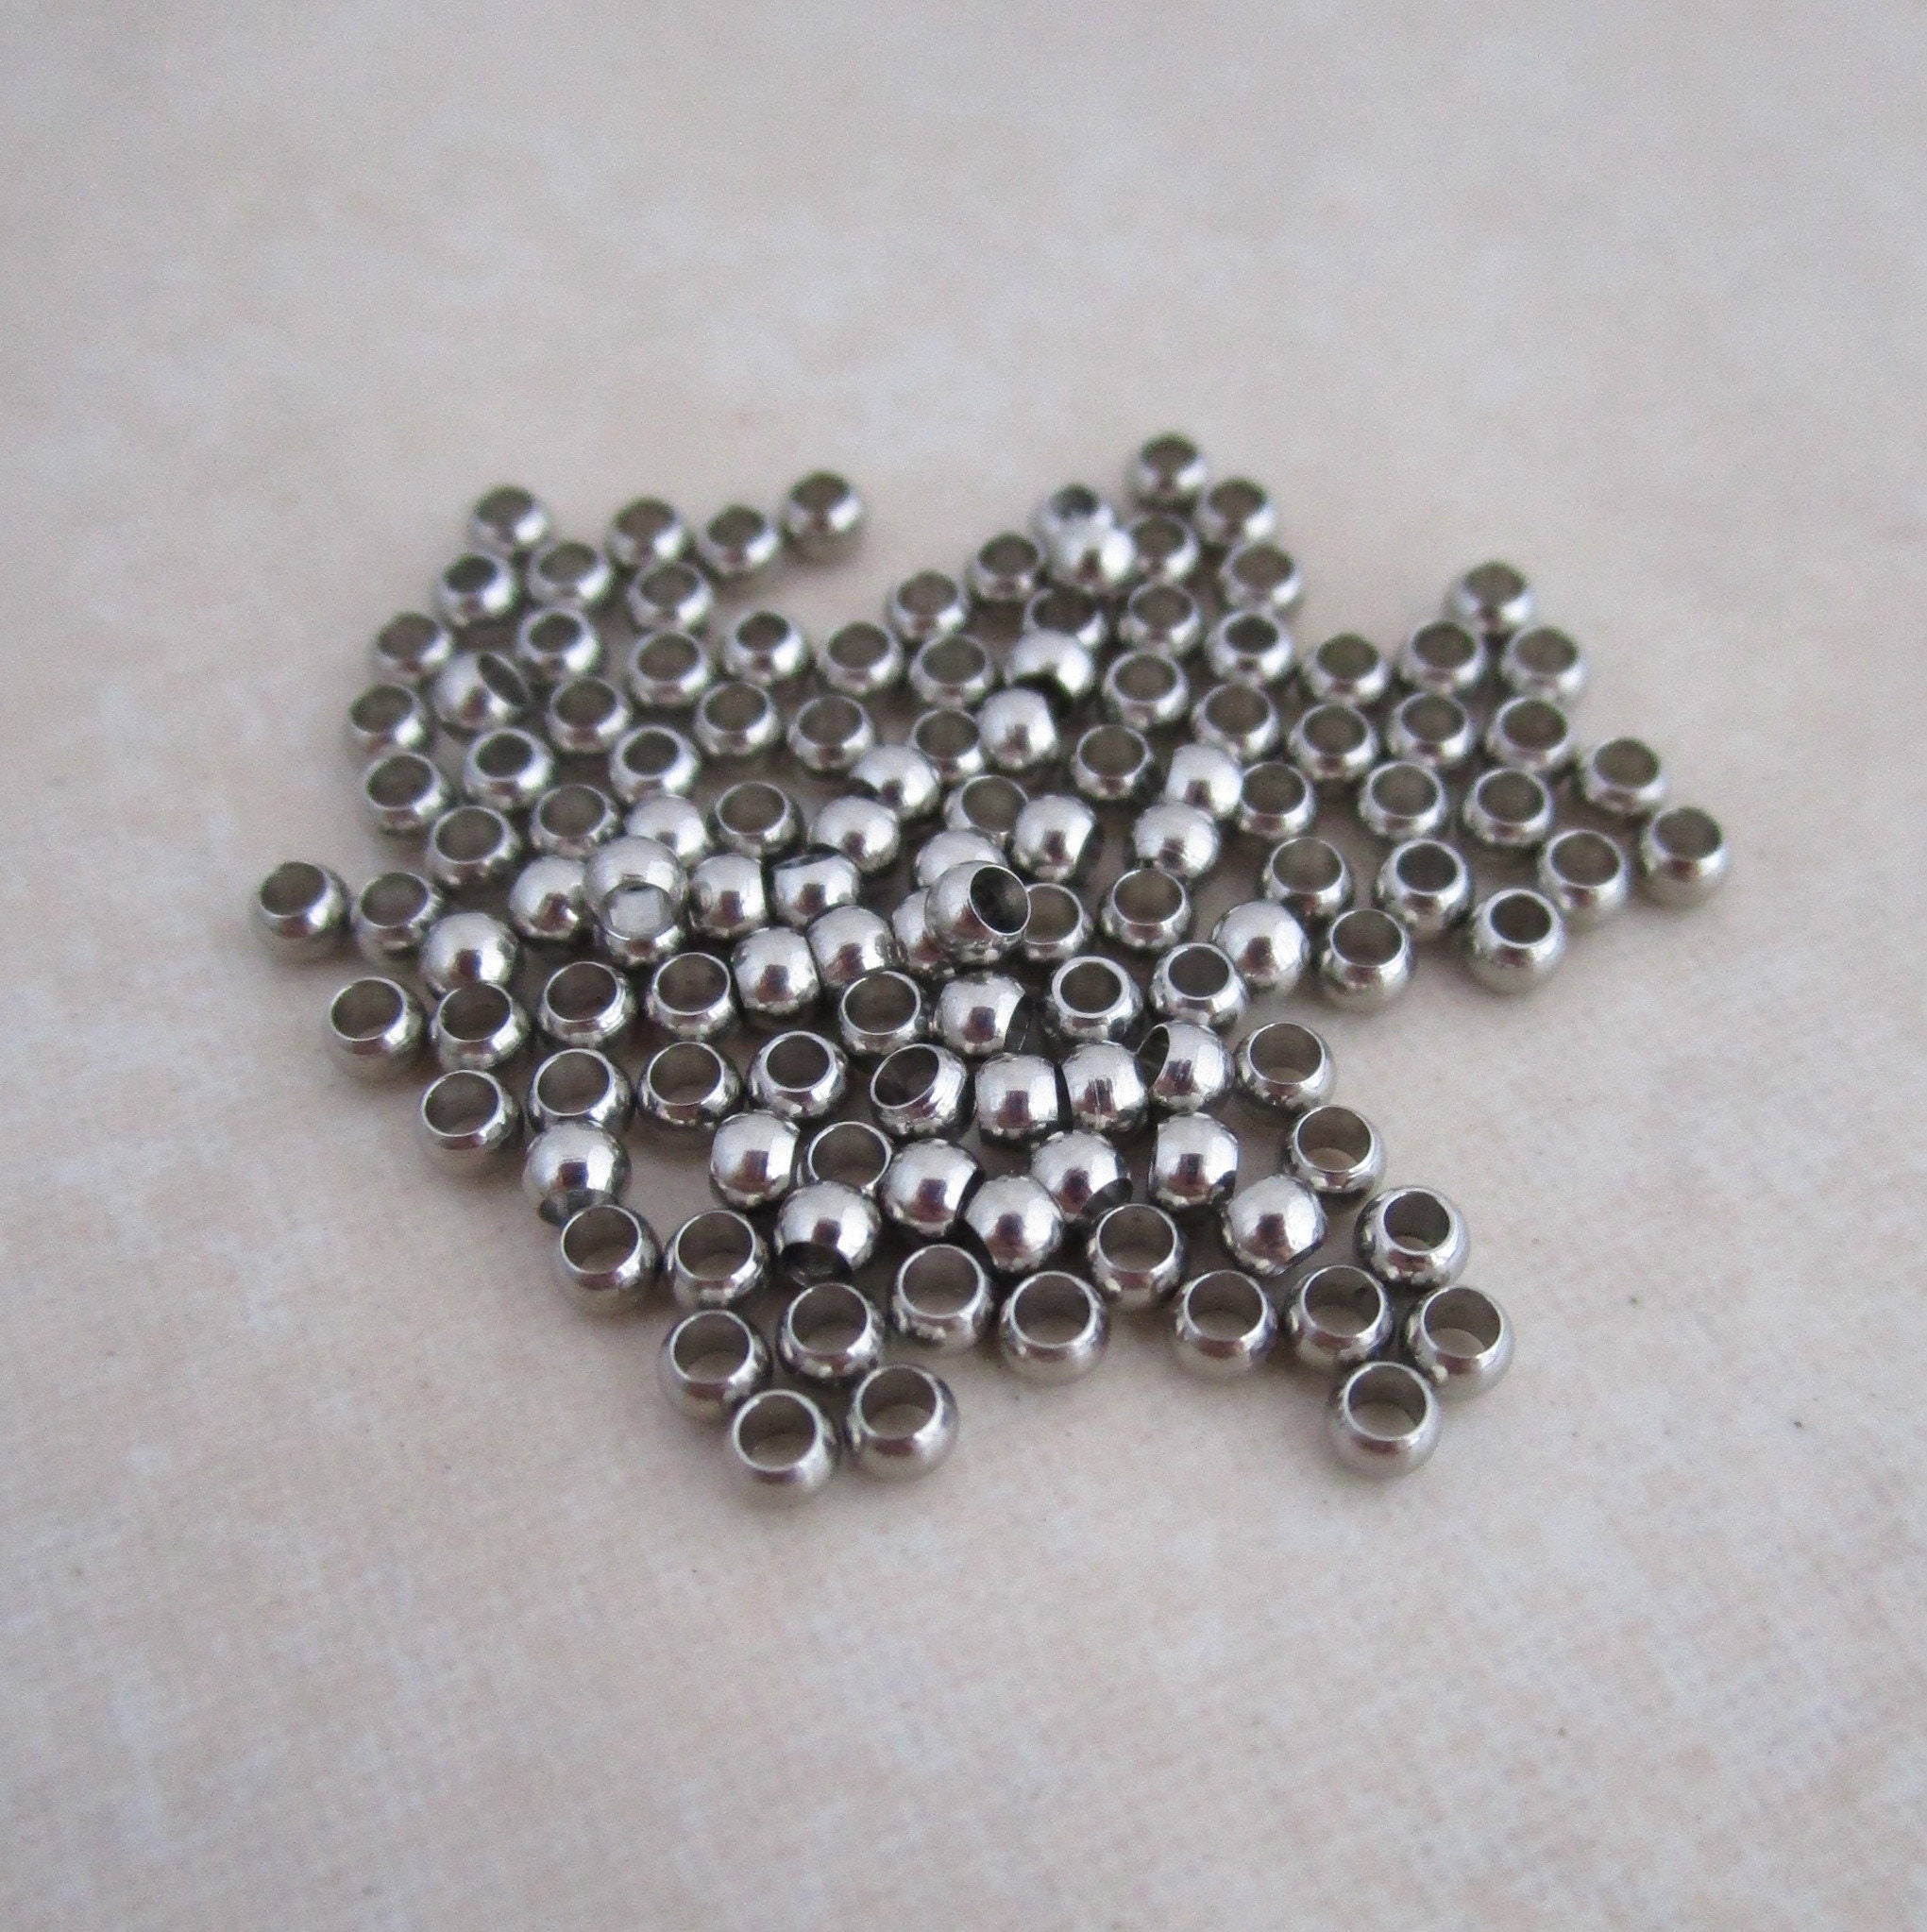 Craftdady 200Pcs Stainless Steel Crimp Bead Covers Metal Half Round Open  Clamp Knot Cover Terminator End Tips 9mm Diameter for Bracelet Necklace